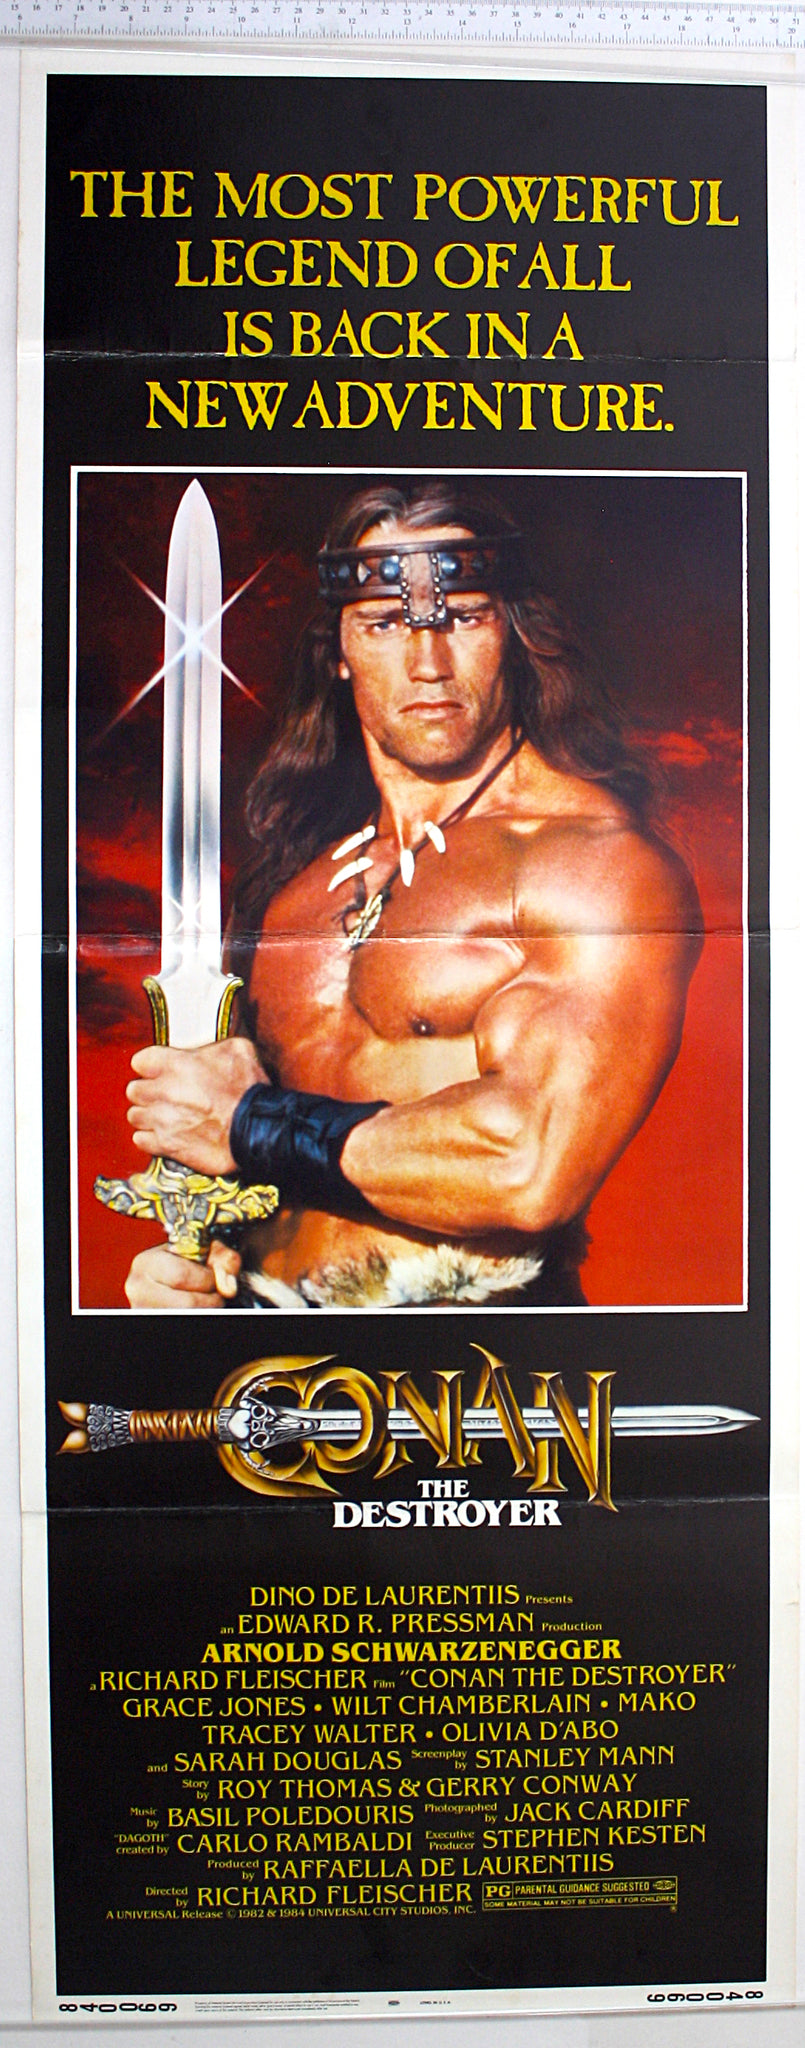 Conan the Destroyer (1984) US Insert Poster